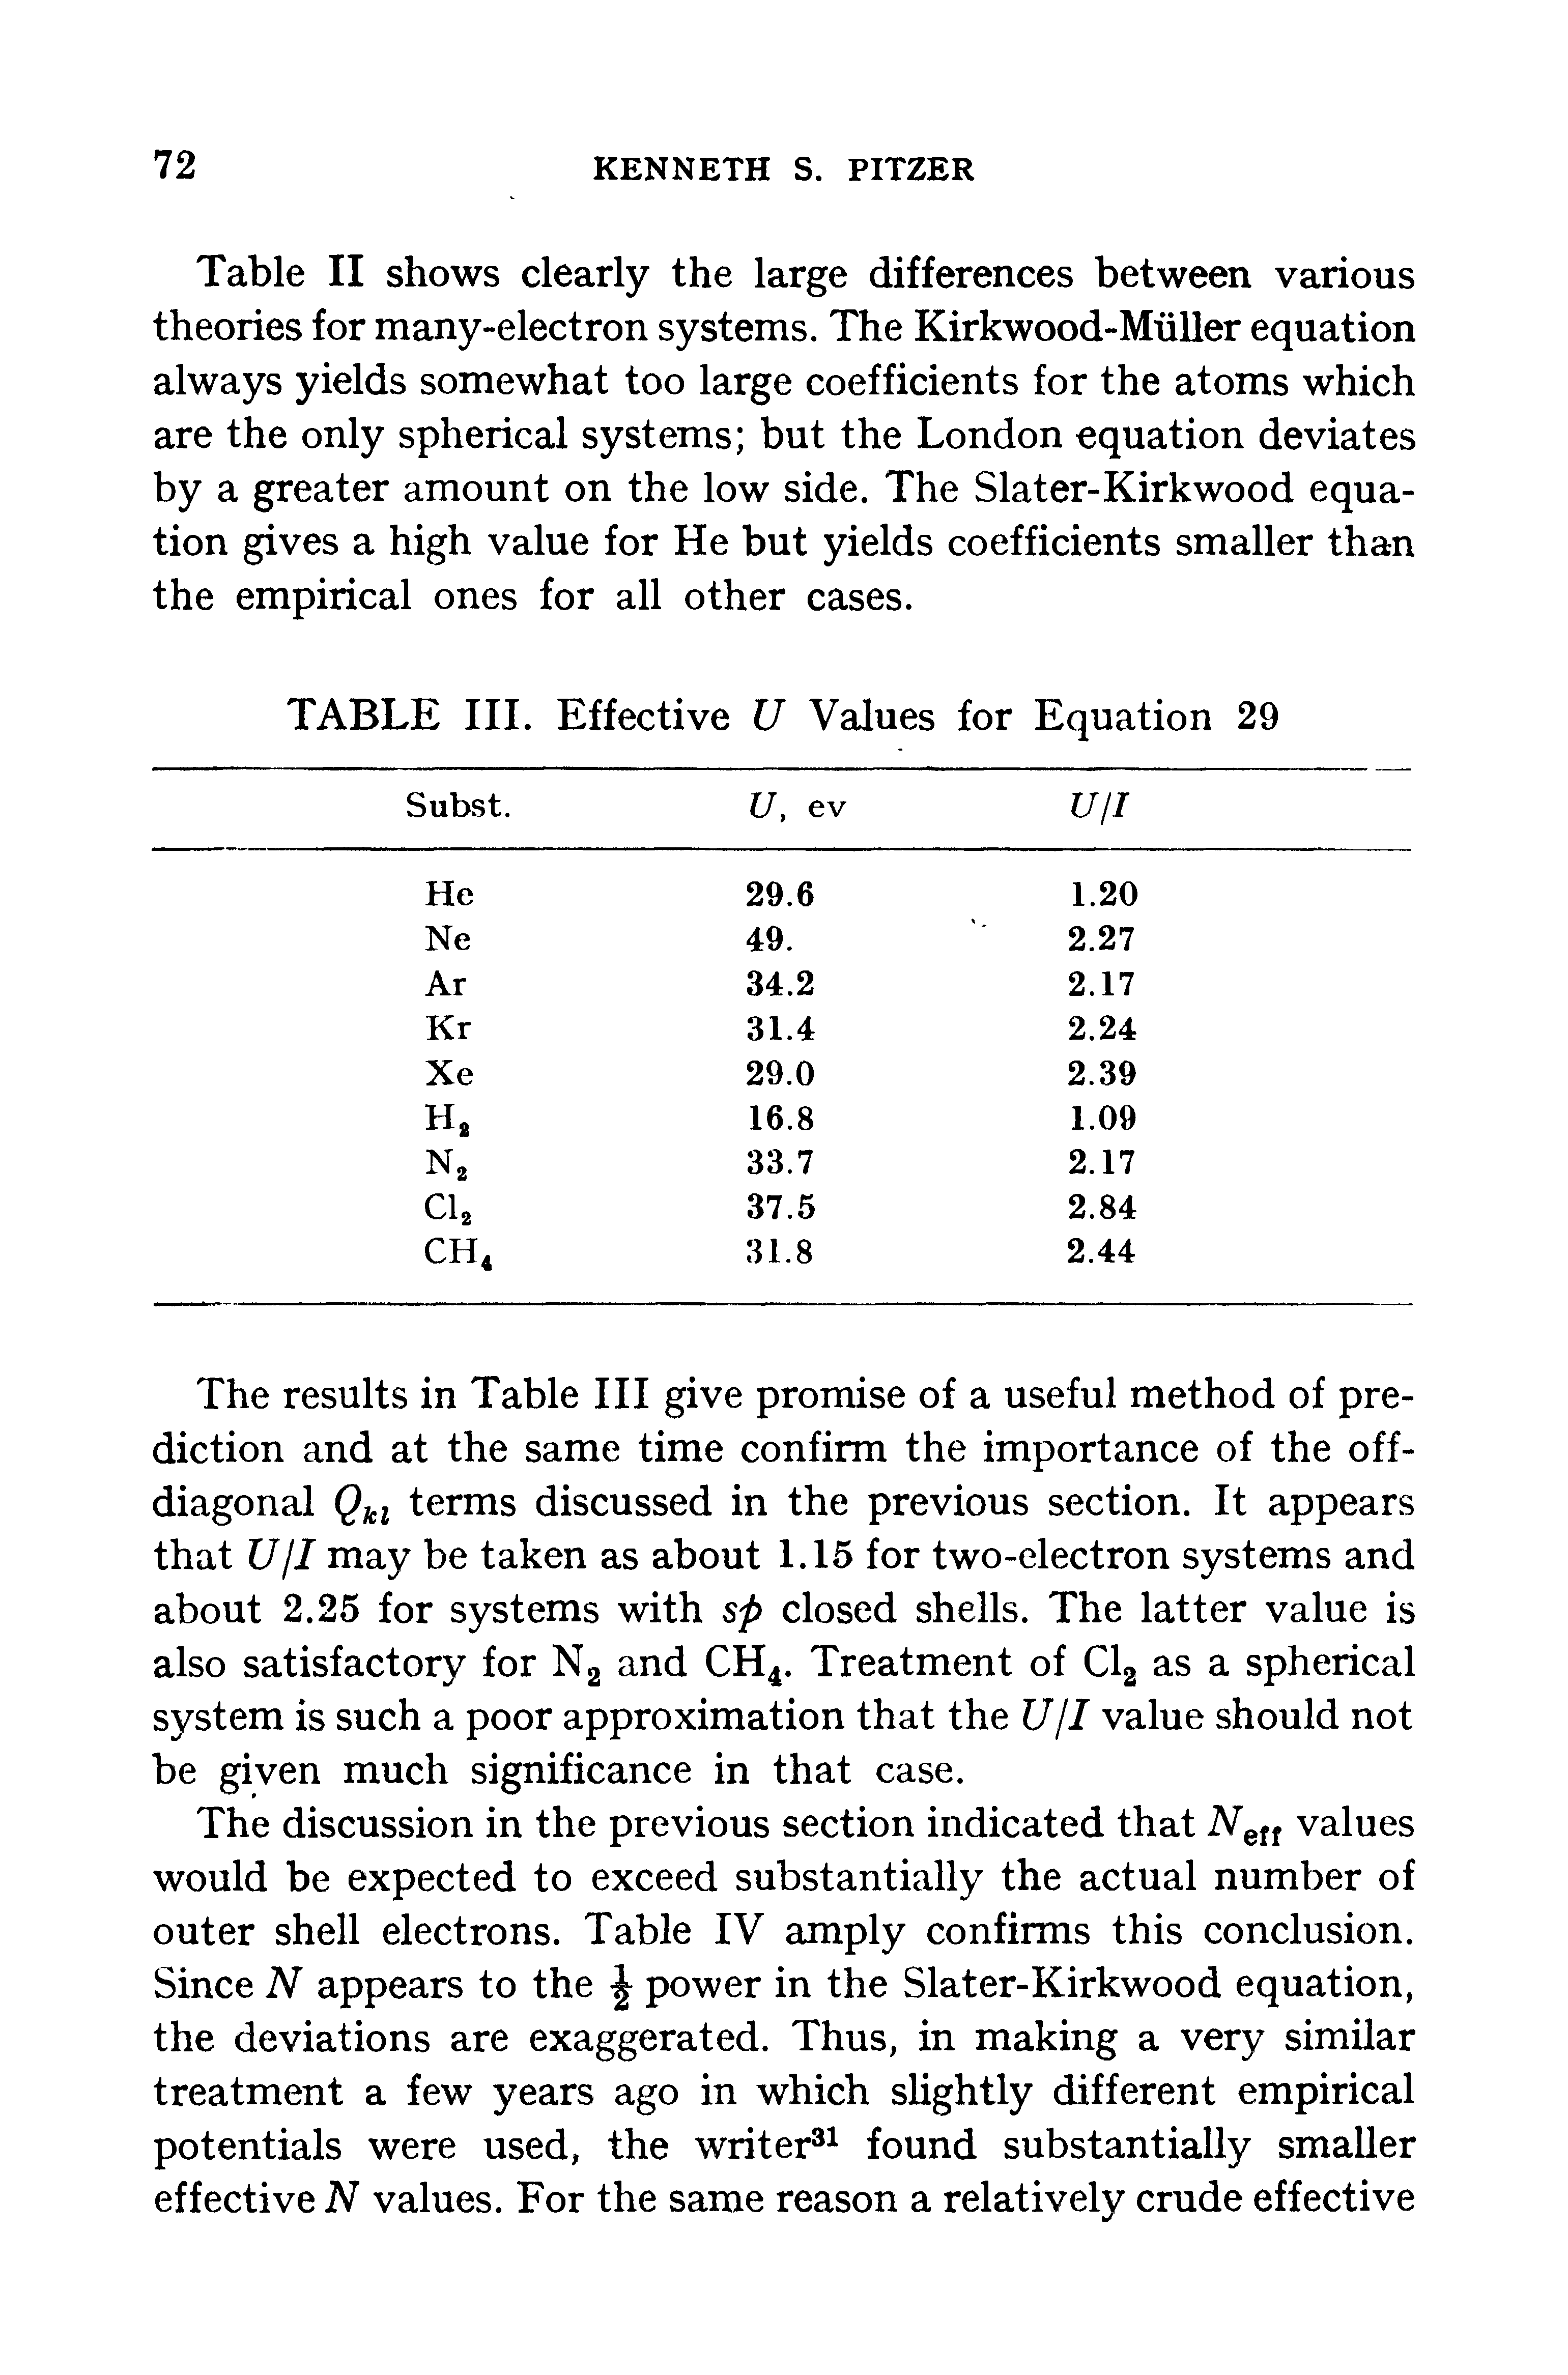 Table II shows clearly the large differences between various theories for many-electron systems. The Kirkwood-Muller equation always yields somewhat too large coefficients for the atoms which are the only spherical systems but the London equation deviates by a greater amount on the low side. The Slater-Kirkwood equation gives a high value for He but yields coefficients smaller than the empirical ones for all other cases.